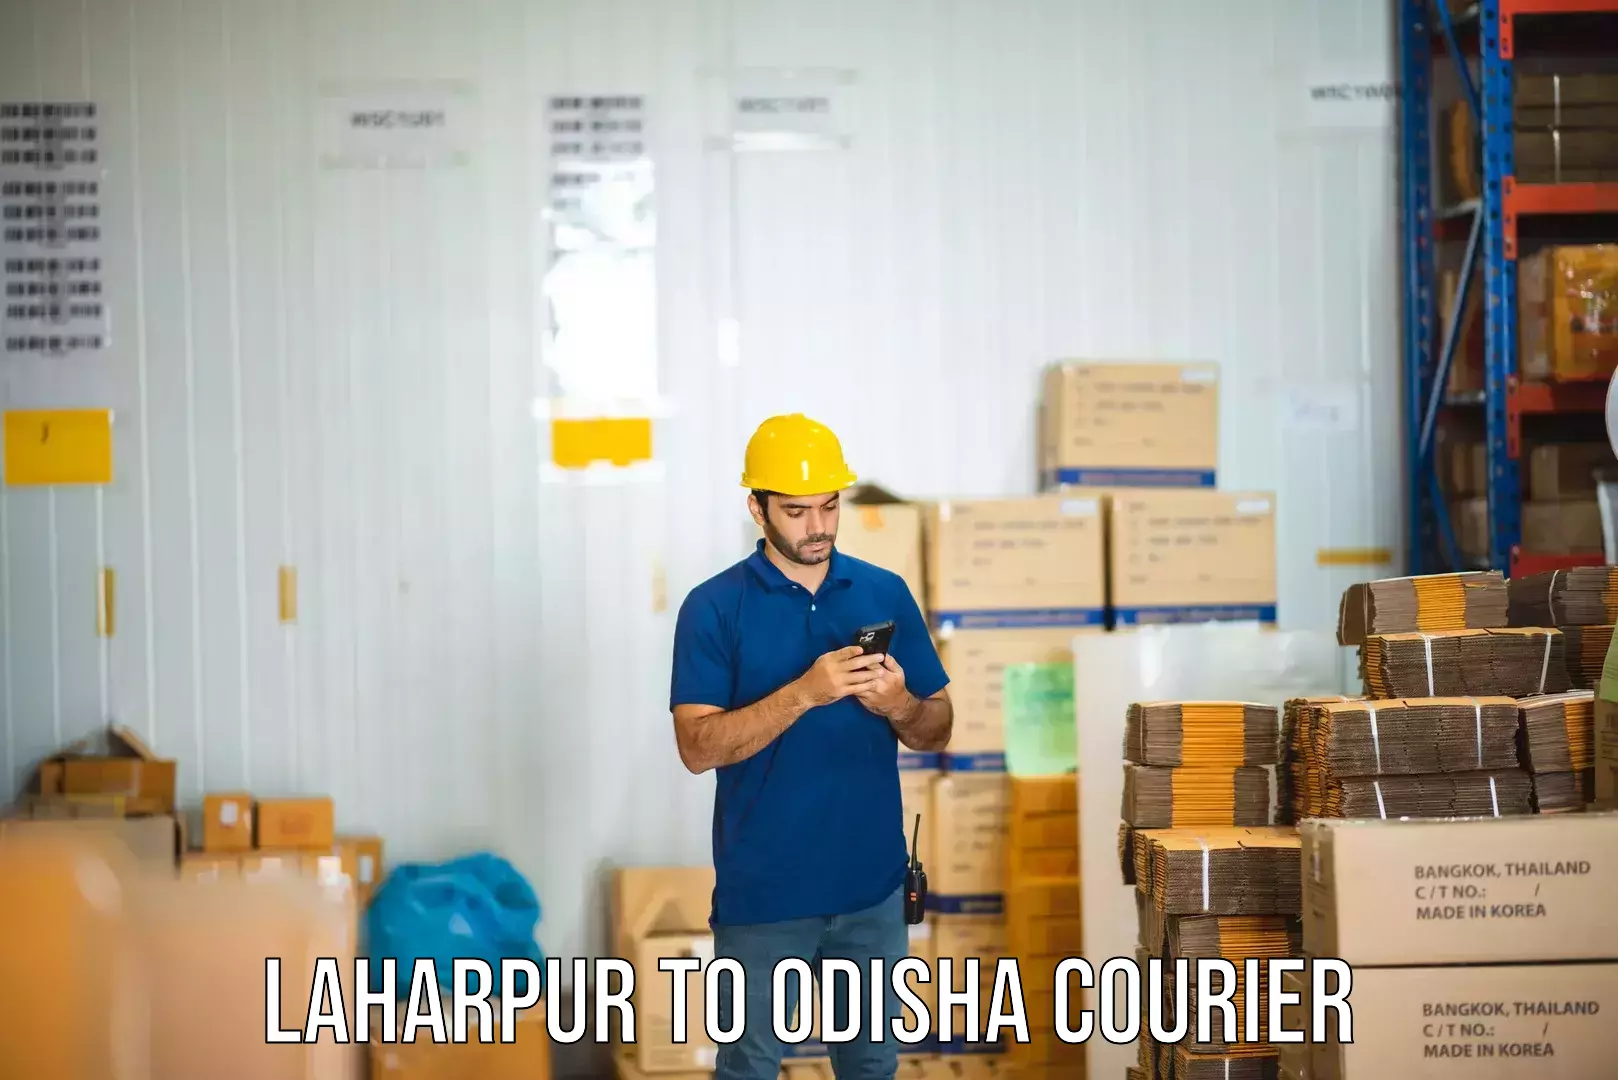 Supply chain efficiency Laharpur to Aul